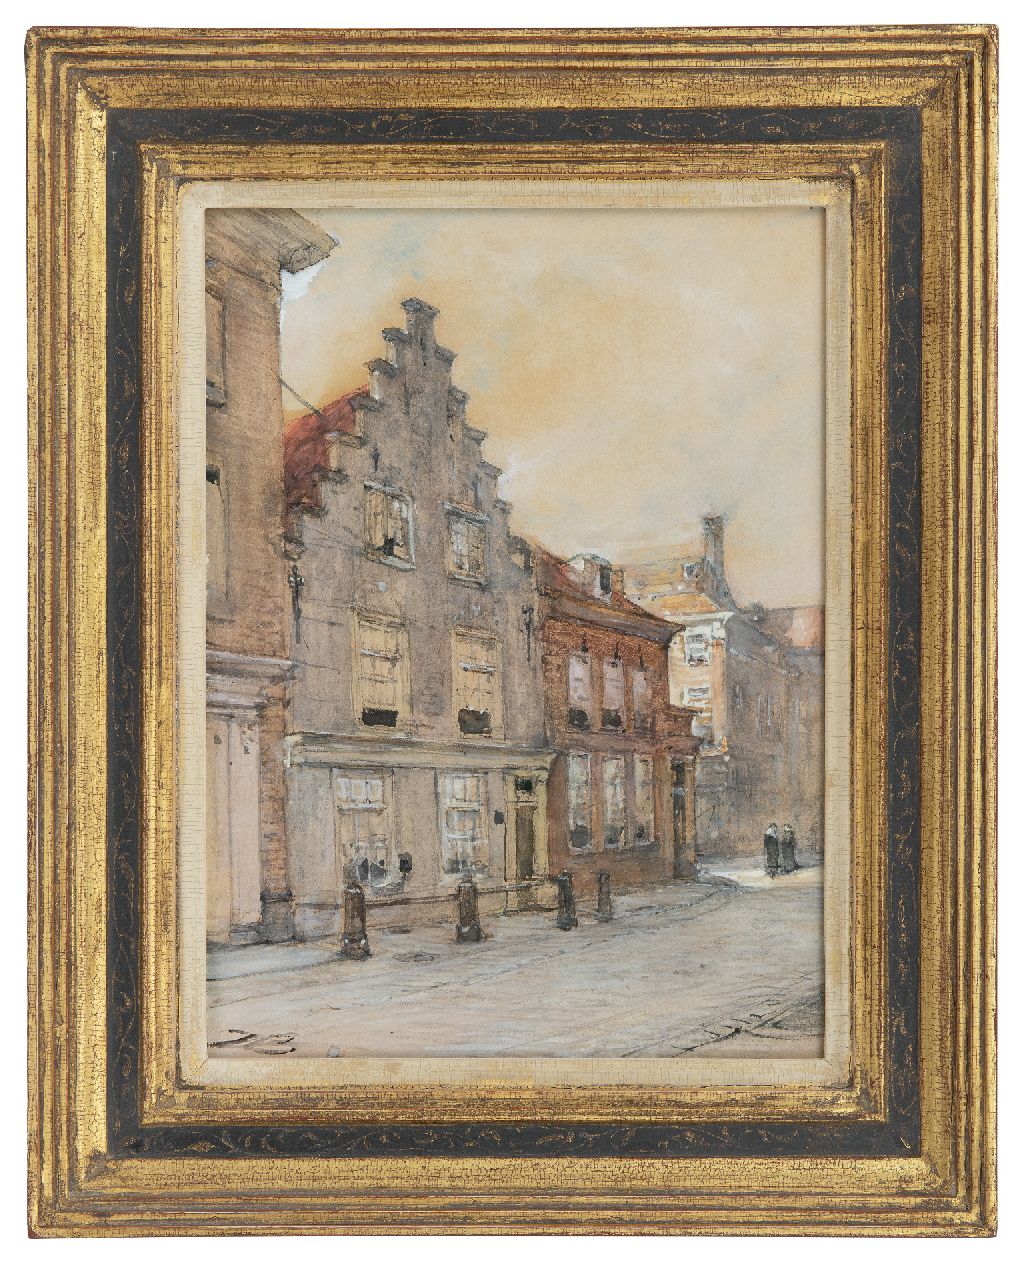 Bosboom J.  | Johannes Bosboom | Watercolours and drawings offered for sale | A view of the 'Huis der Samenkomsten van de Doopsgezinden' in The Hague, watercolour on paper 30.9 x 22.7 cm, signed l.l. with initials